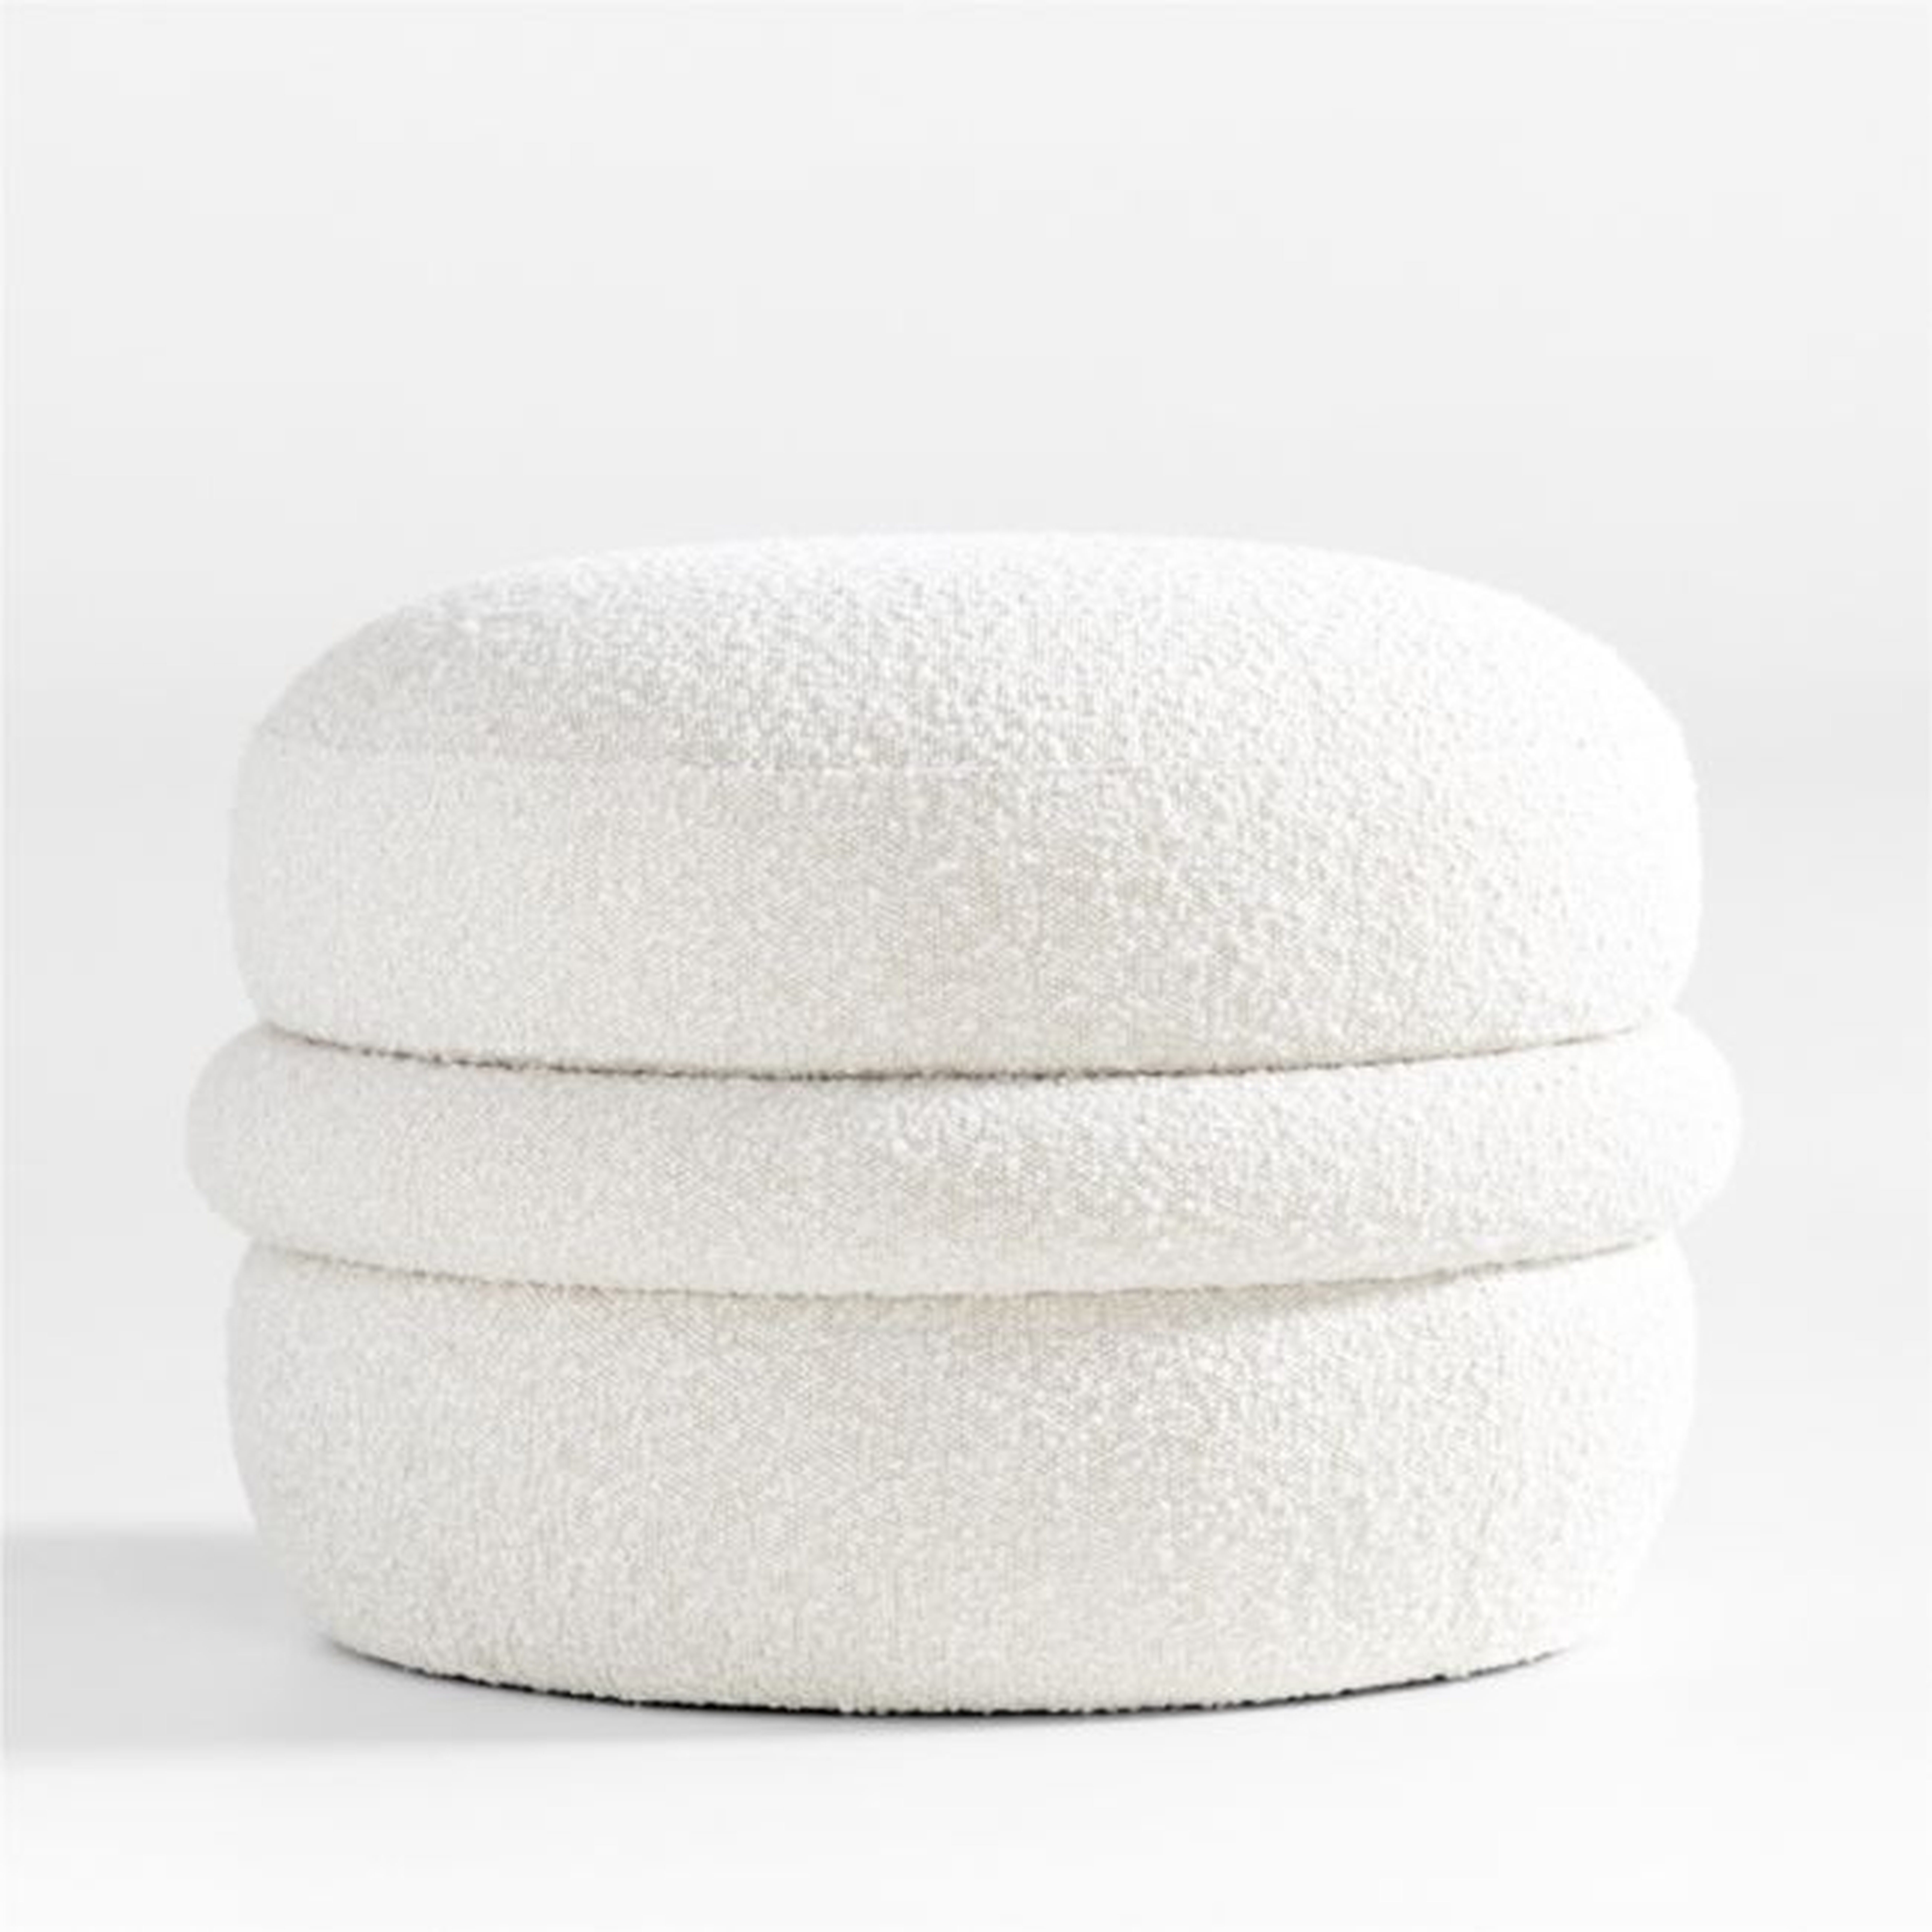 Macaron Cream Boucle Round Storage Nursery Ottoman by Leanne Ford - Crate and Barrel